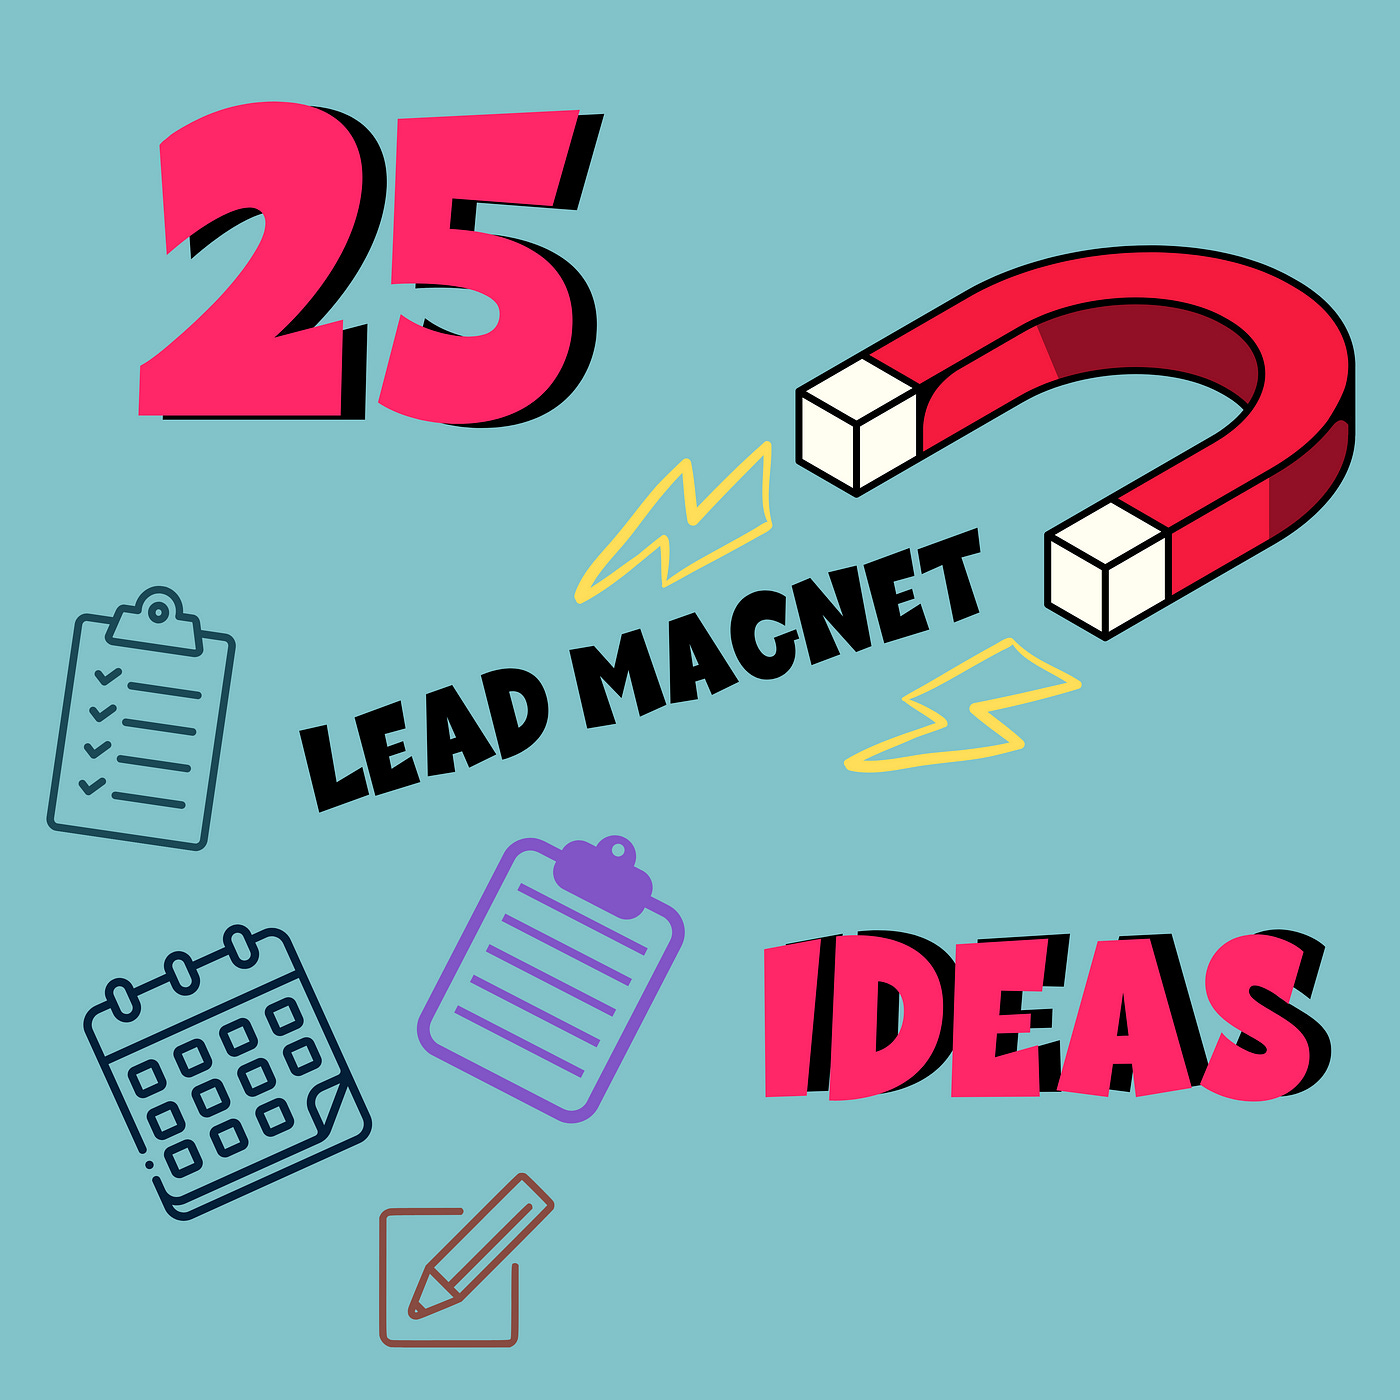 25 lead magnet ideas with picture of magnet and icons